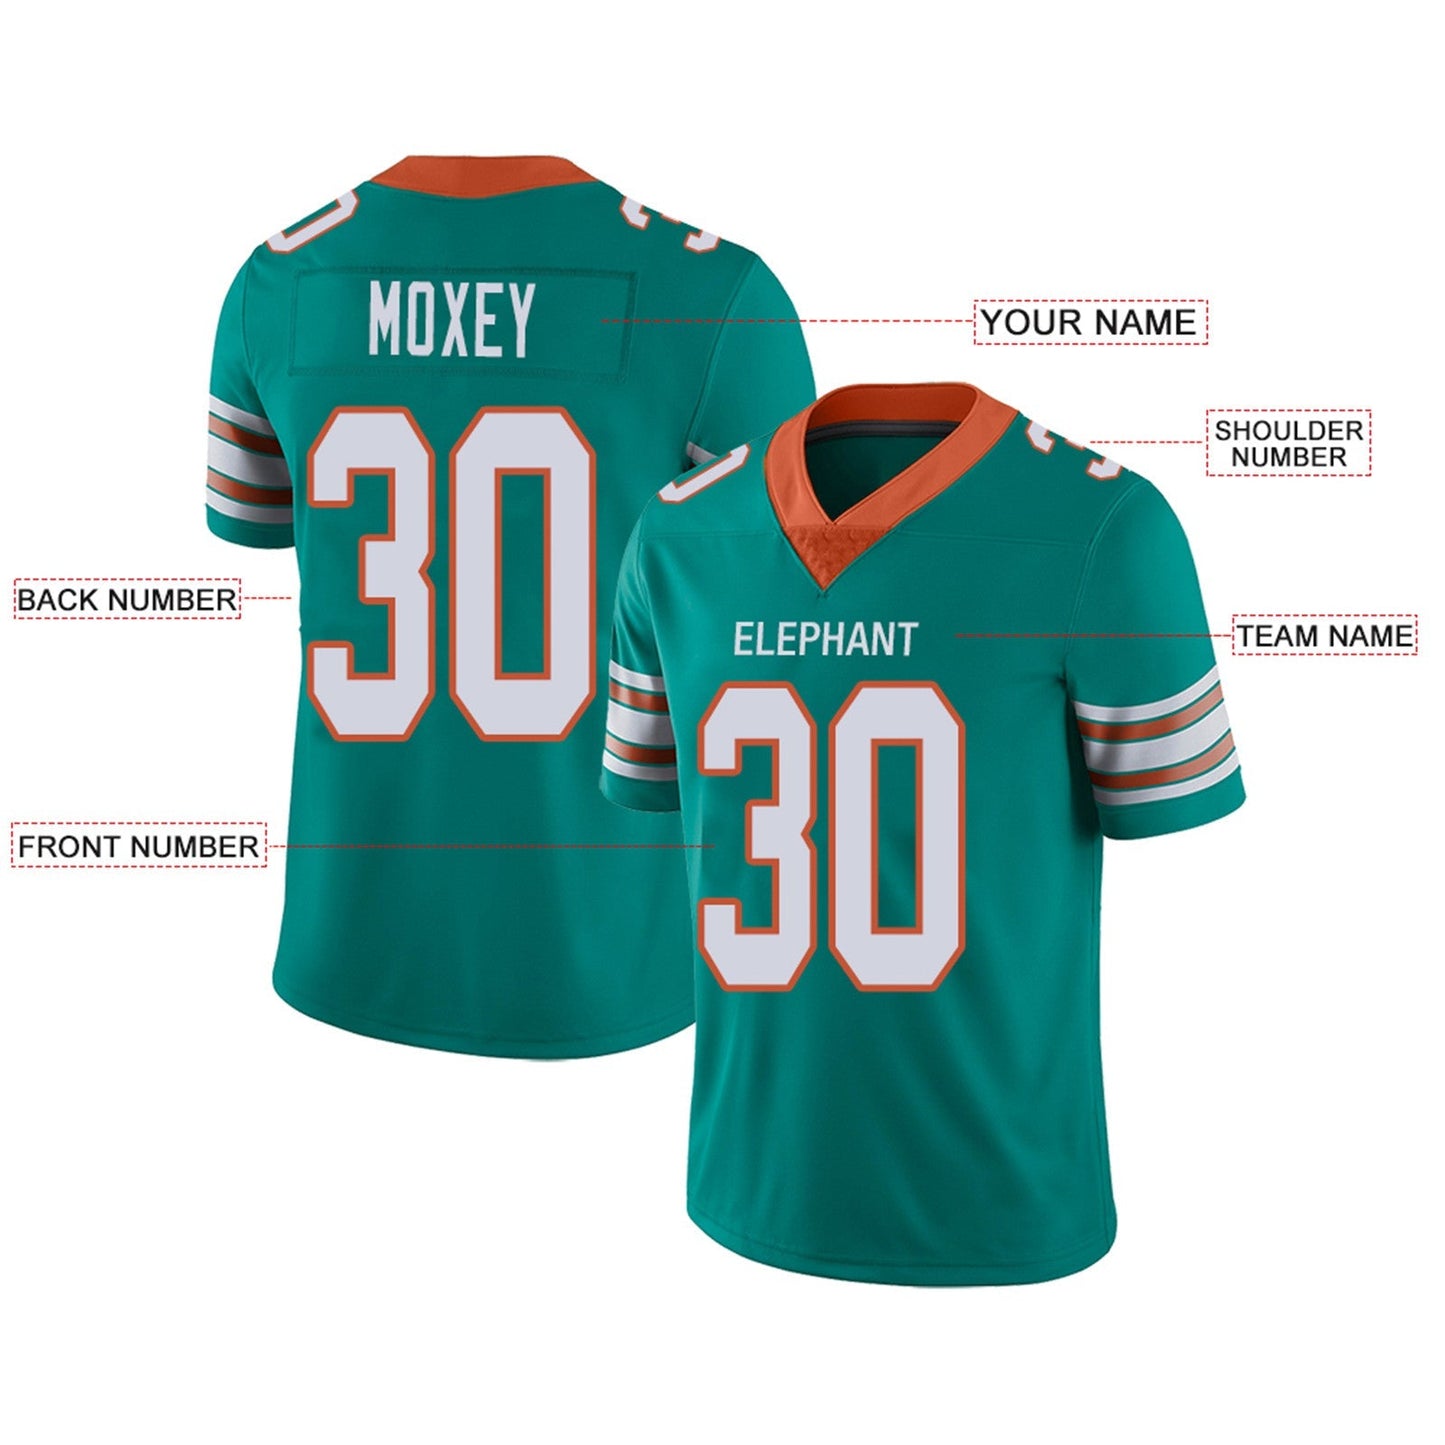 Custom M.Dolphins Football Jerseys Team Player or Personalized Design Your Own Name for Men's Women's Youth Jerseys Aqua